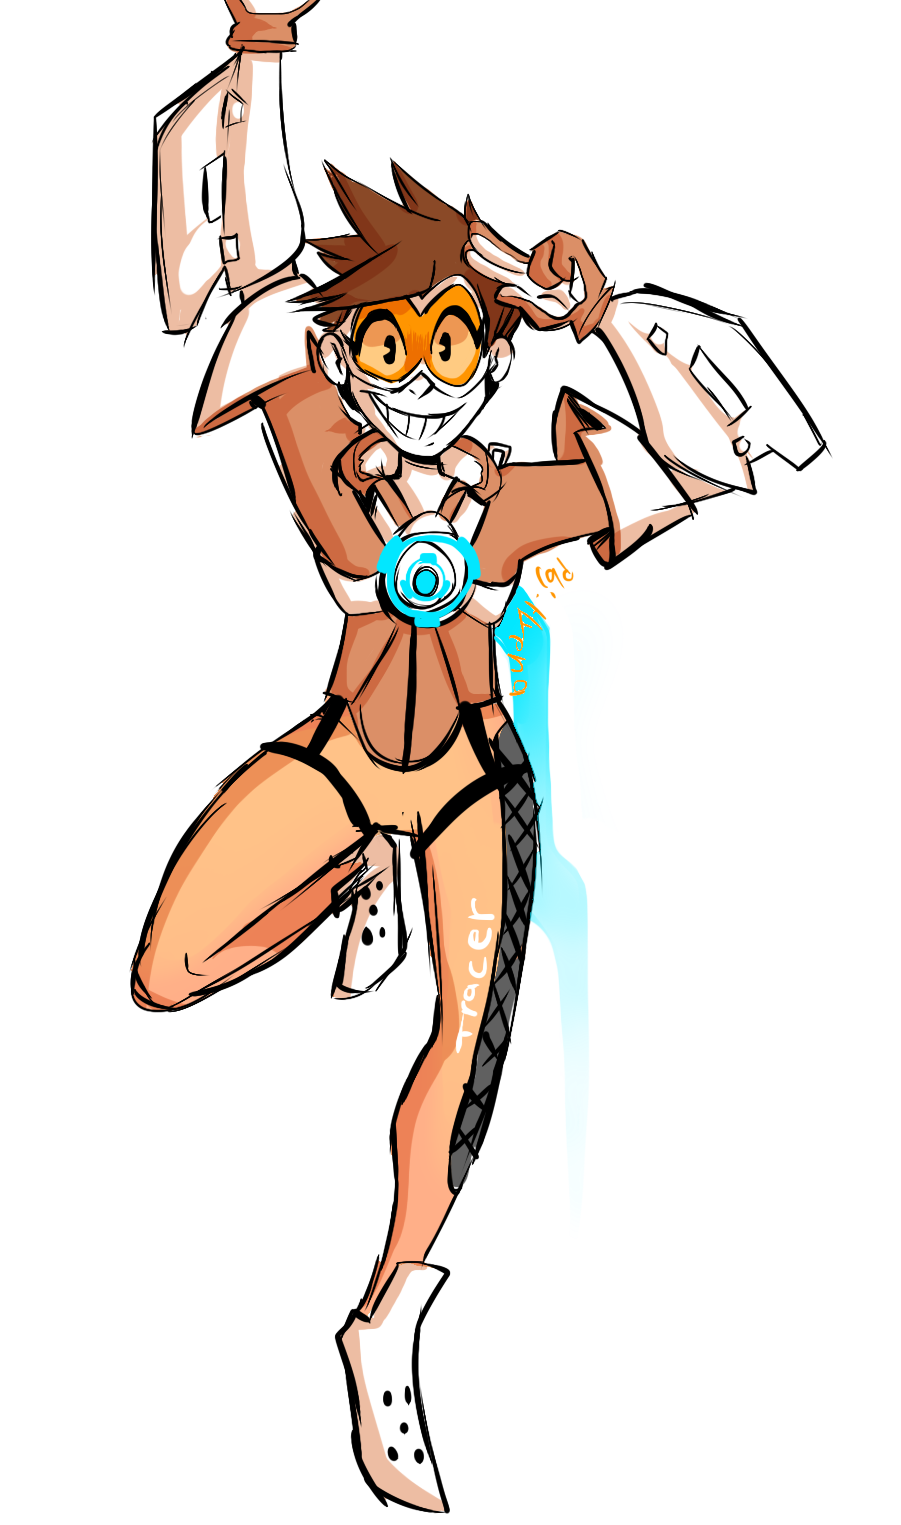 tracer_by_mega_yene-db3t5ou.png